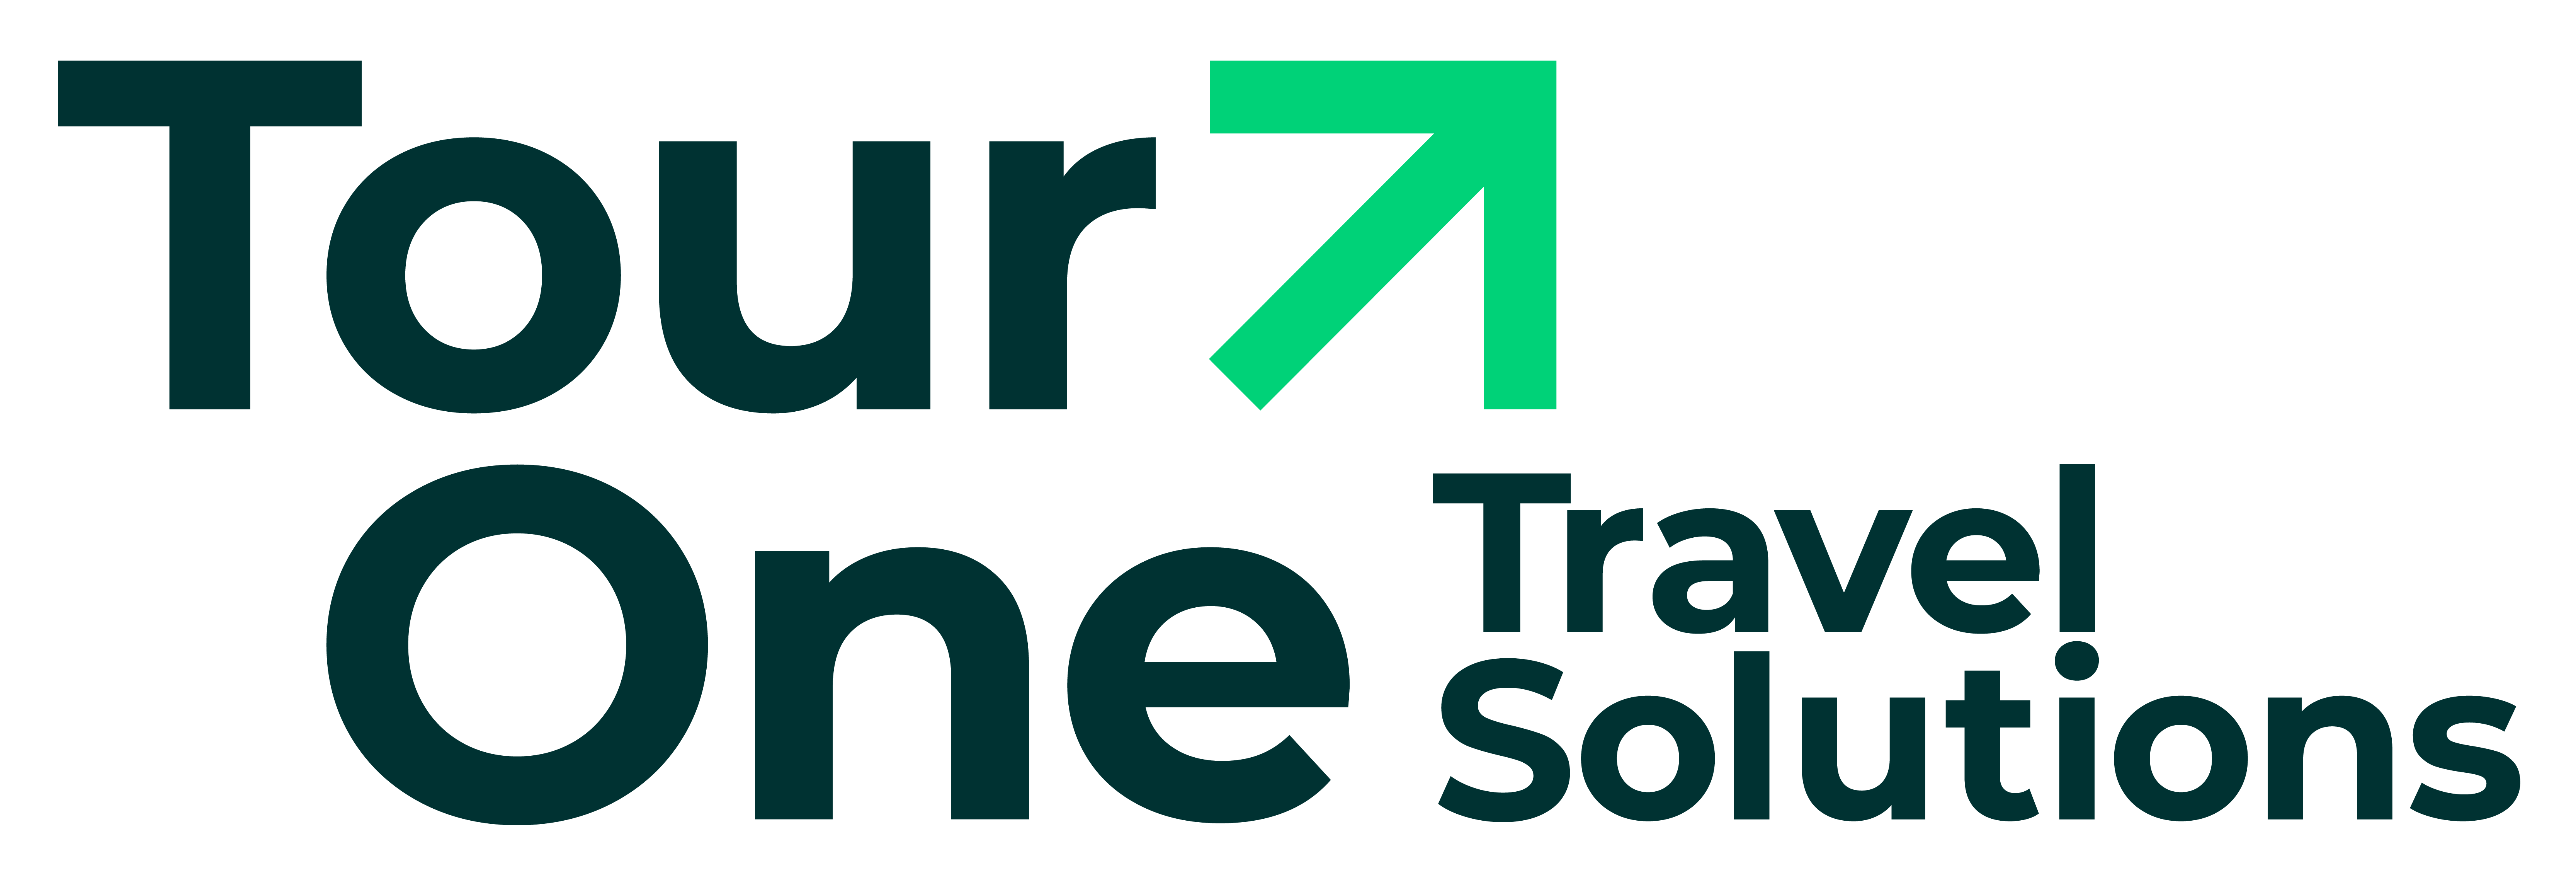 TourOne Travel Solutions